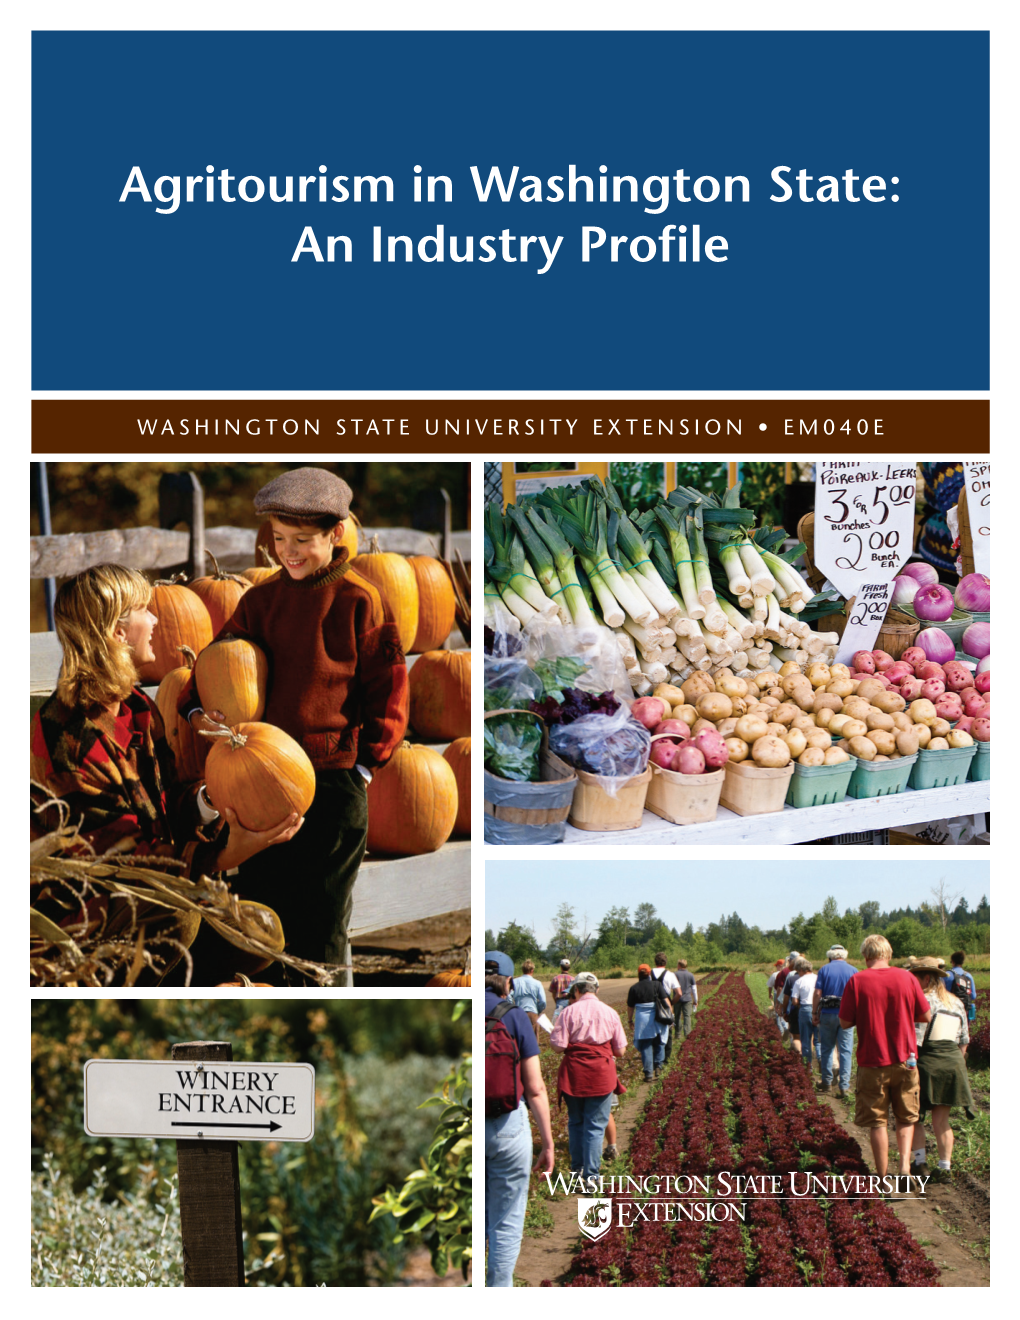 Agritourism in Washington State: an Industry Profile